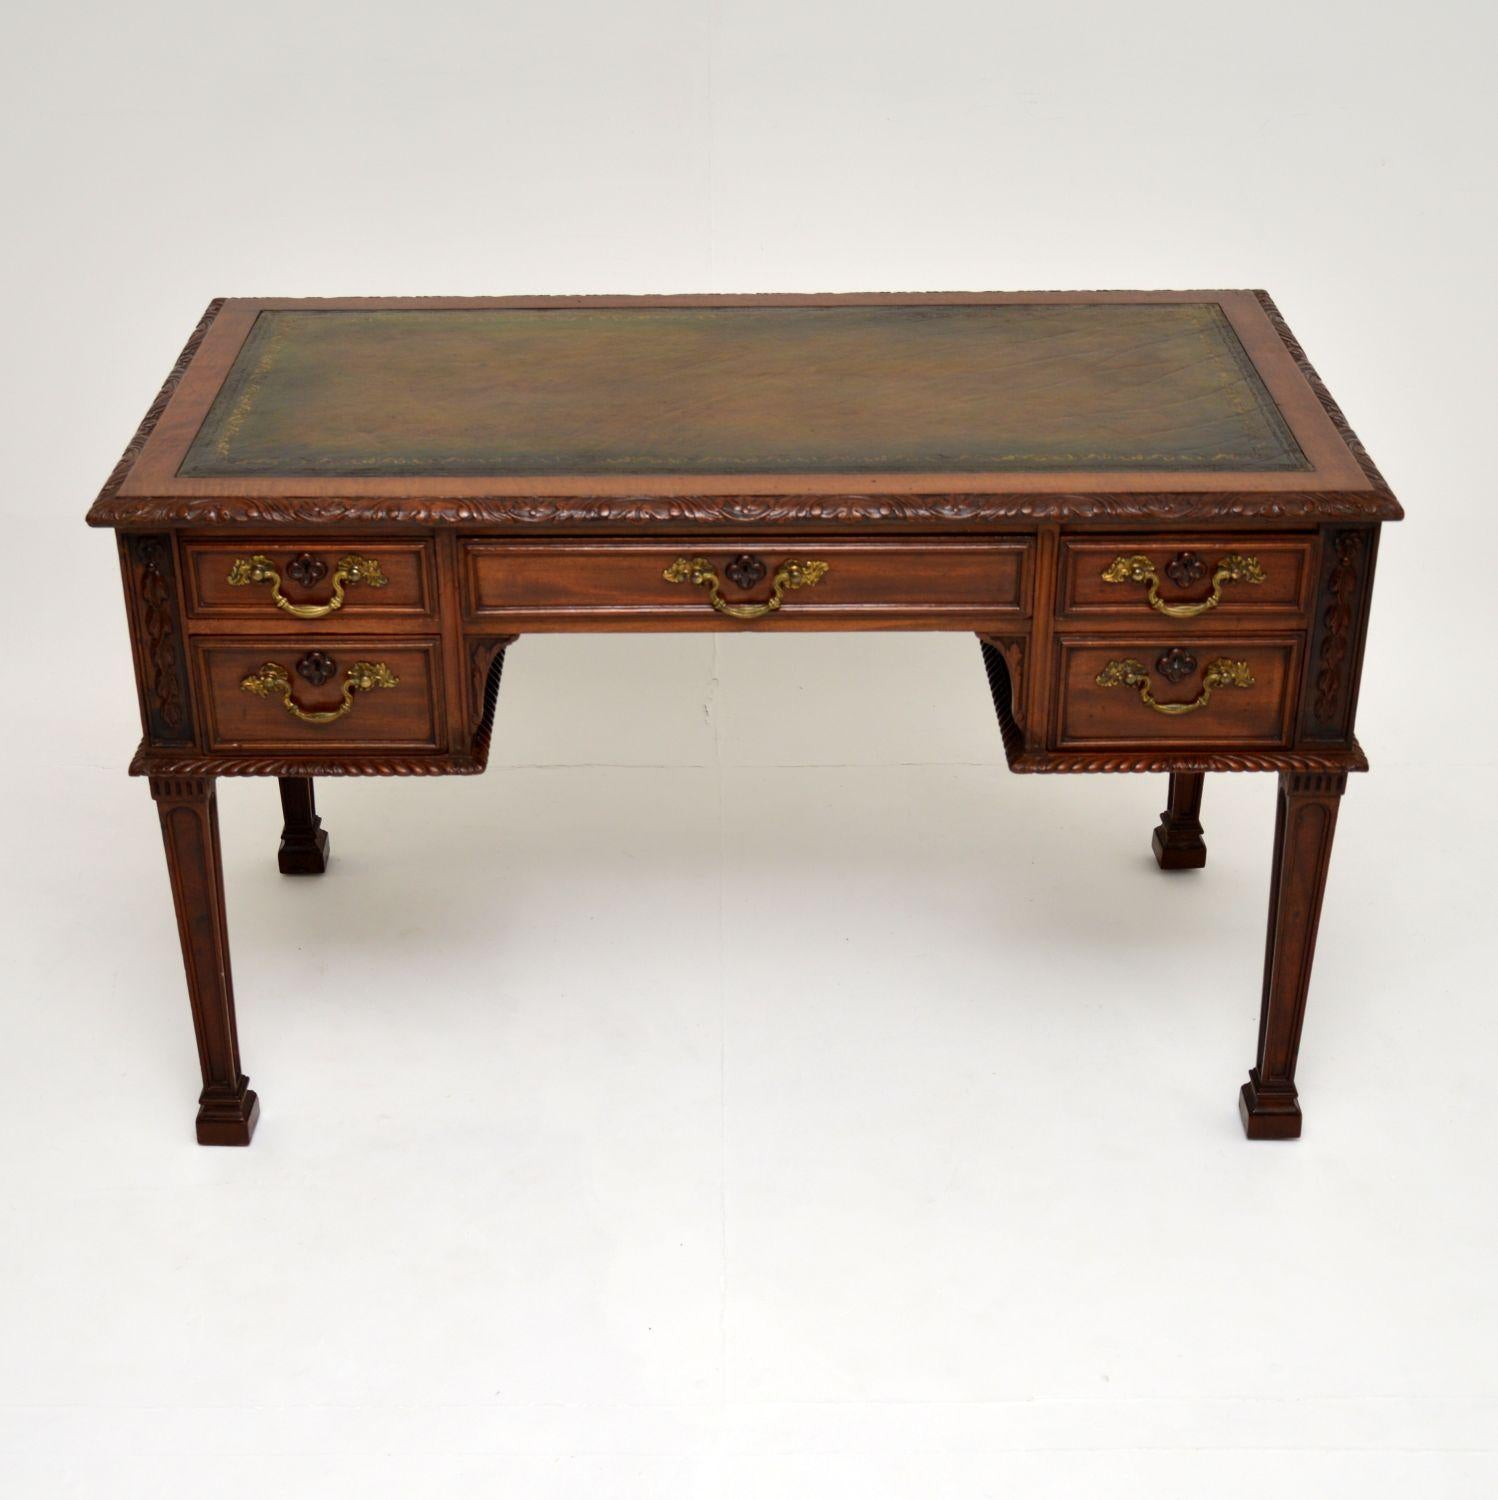 An excellent antique mahogany desk, in the Chippendale style. This was made in England & dates from around the 1890-1900 period.

The quality is absolutely magnificent, this has stunning carved details throughout on all sides. Even the escutcheons